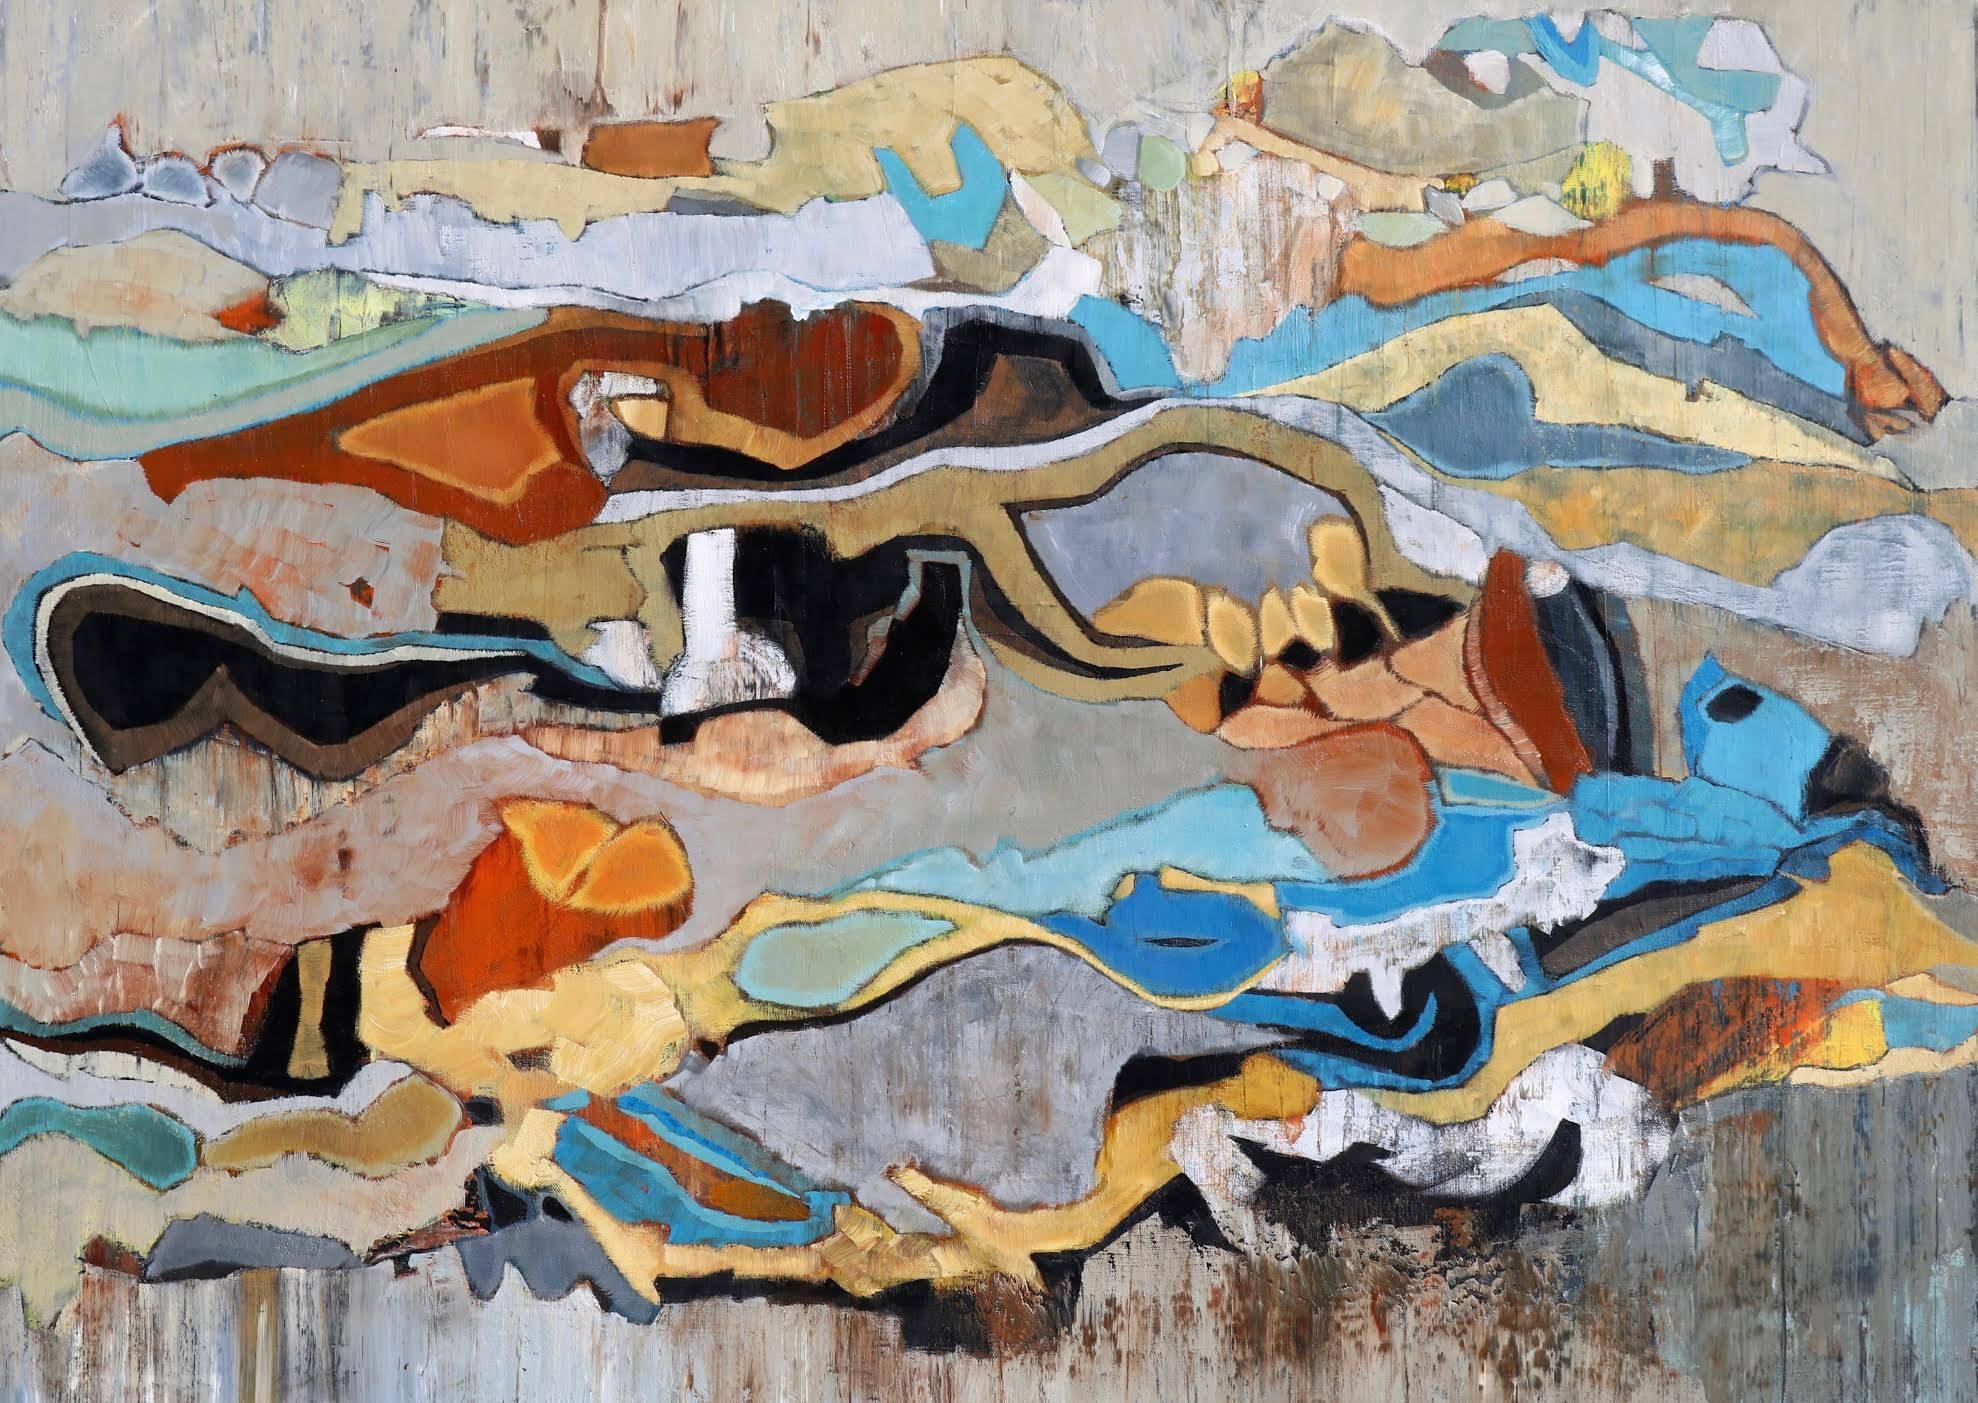 Chase Langford Abstract Painting - "Emerald Bay 22" Abstract in Browns, Turquoise, Blue, Orange, Neutrals